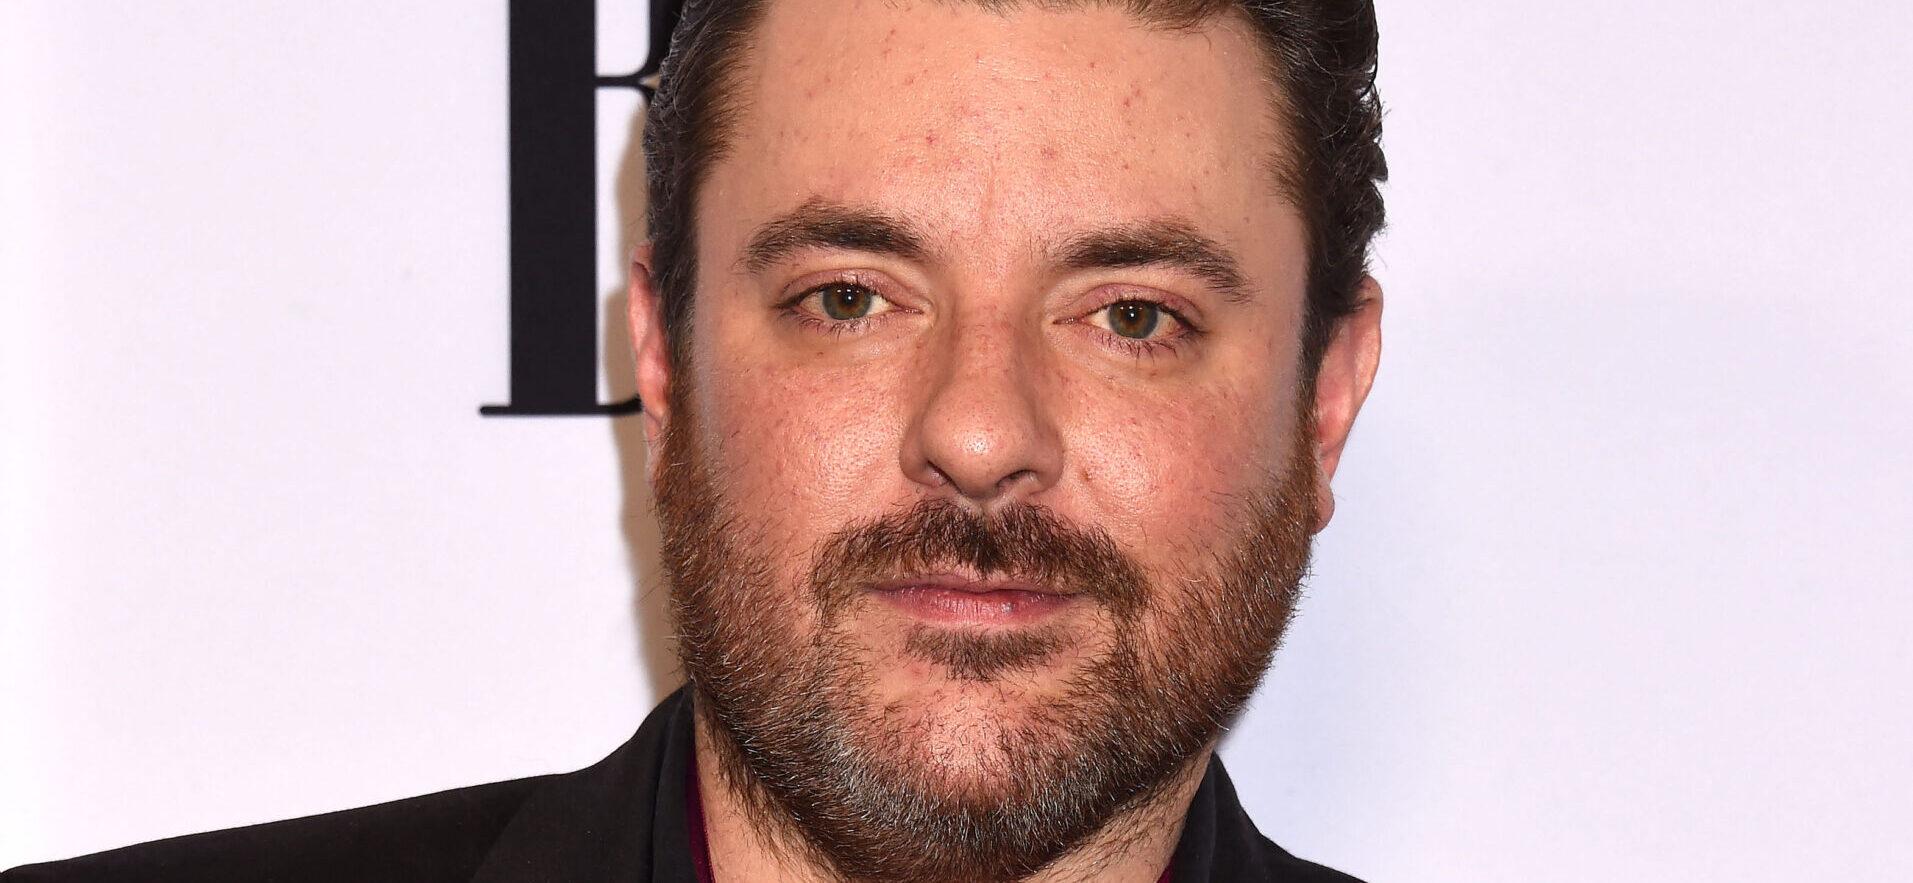 Country Music Star Chris Young Arrested After Allegedly Assaulting An Officer